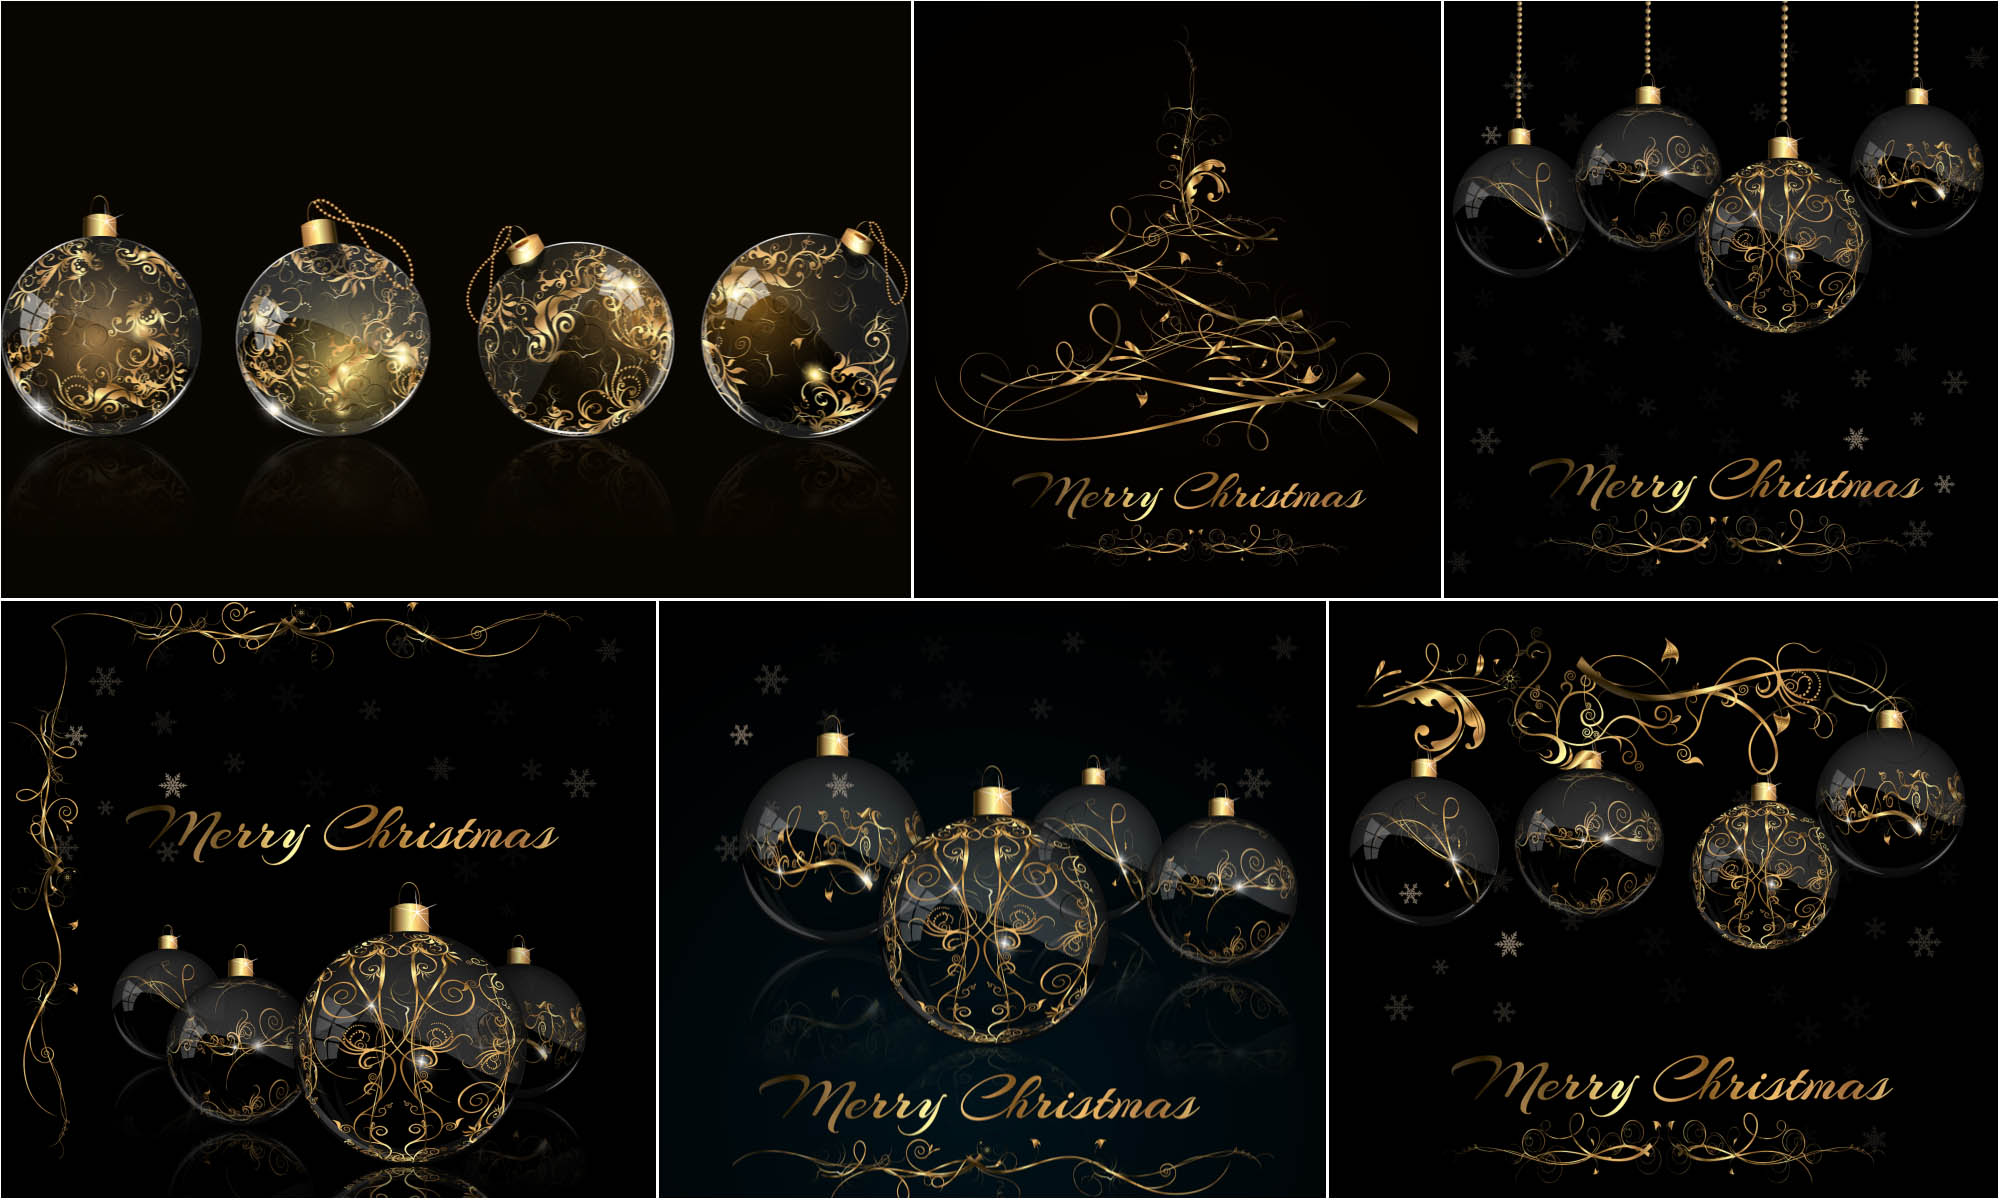 Black xmas cards, nice Christmas backgrounds with golden ornaments balls vectors